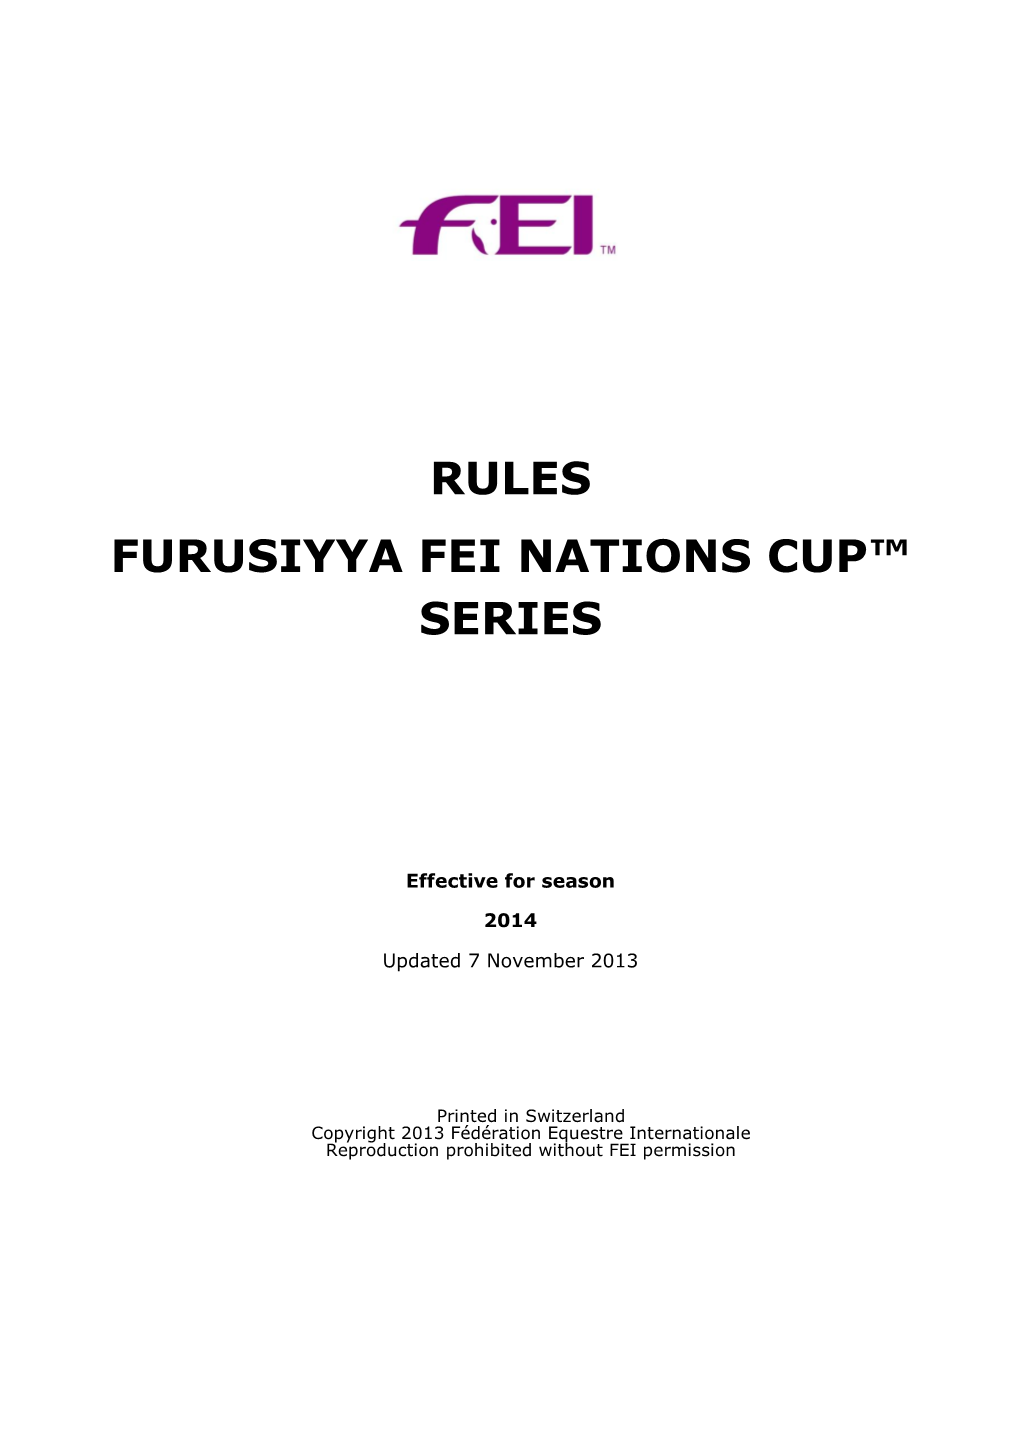 Rules Furusiyya Fei Nations Cup™ Series